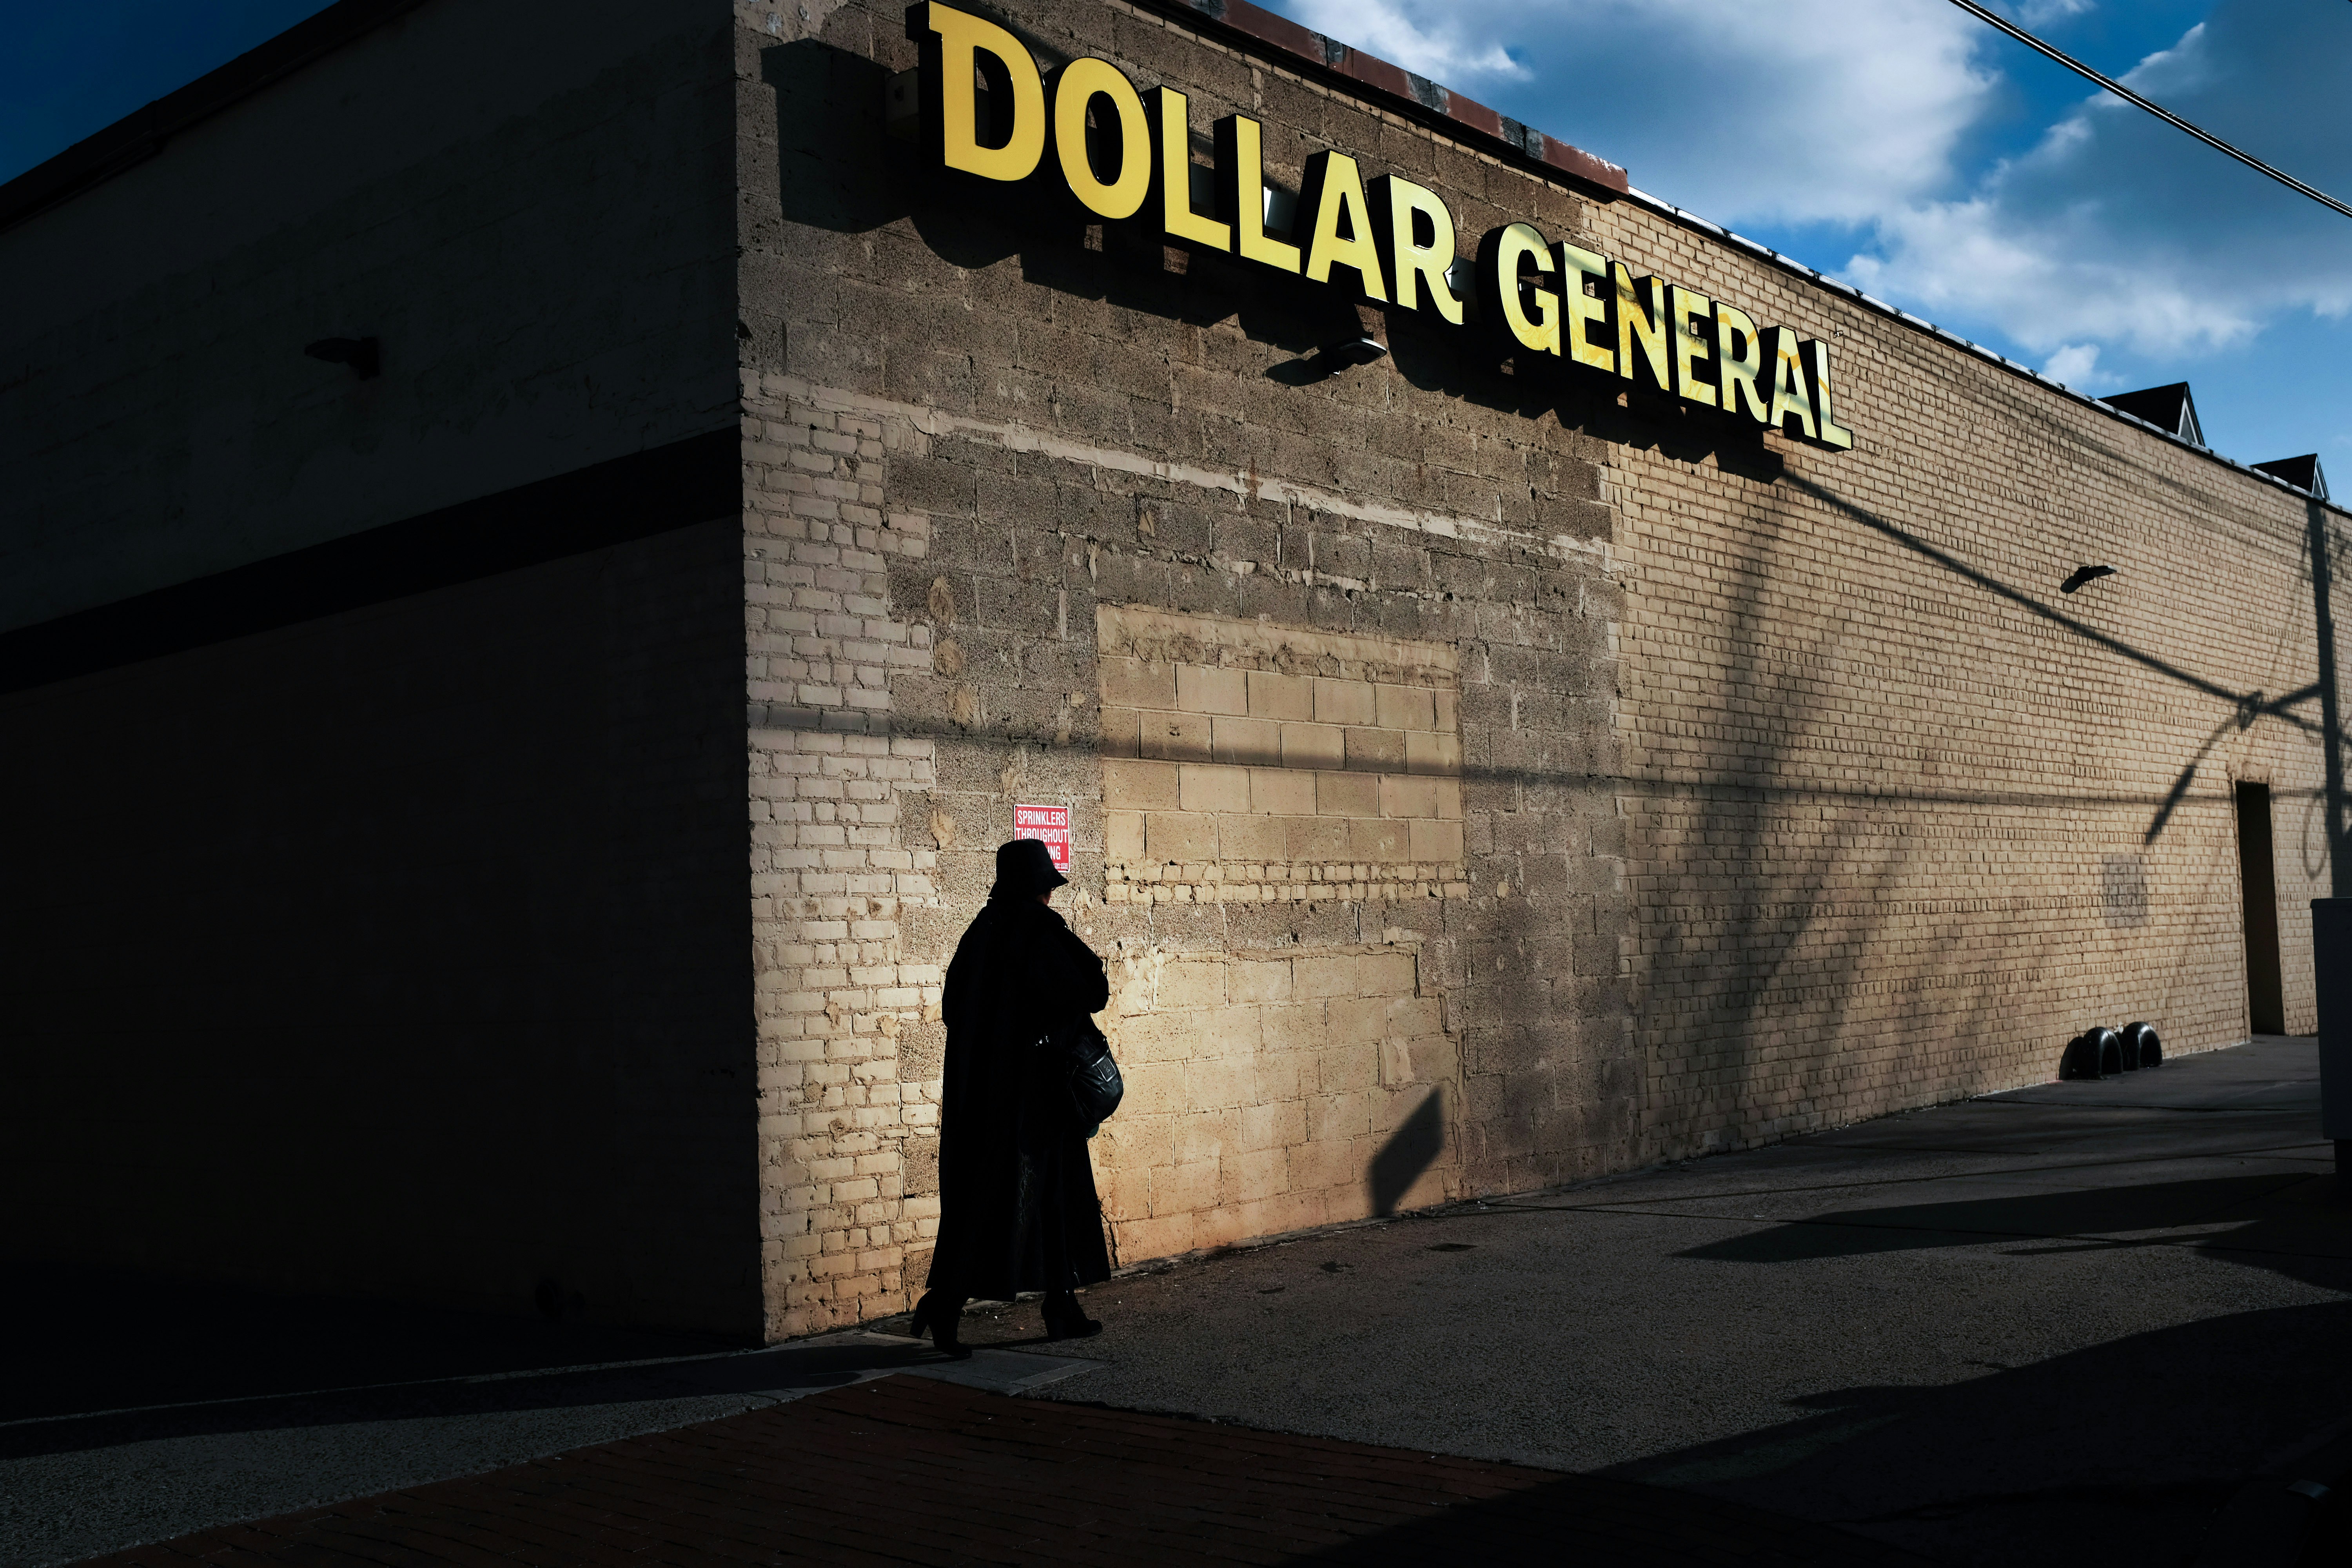 A woman walks by a Dollar General store on December 11, 2018 in the Brooklyn borough of New York City.